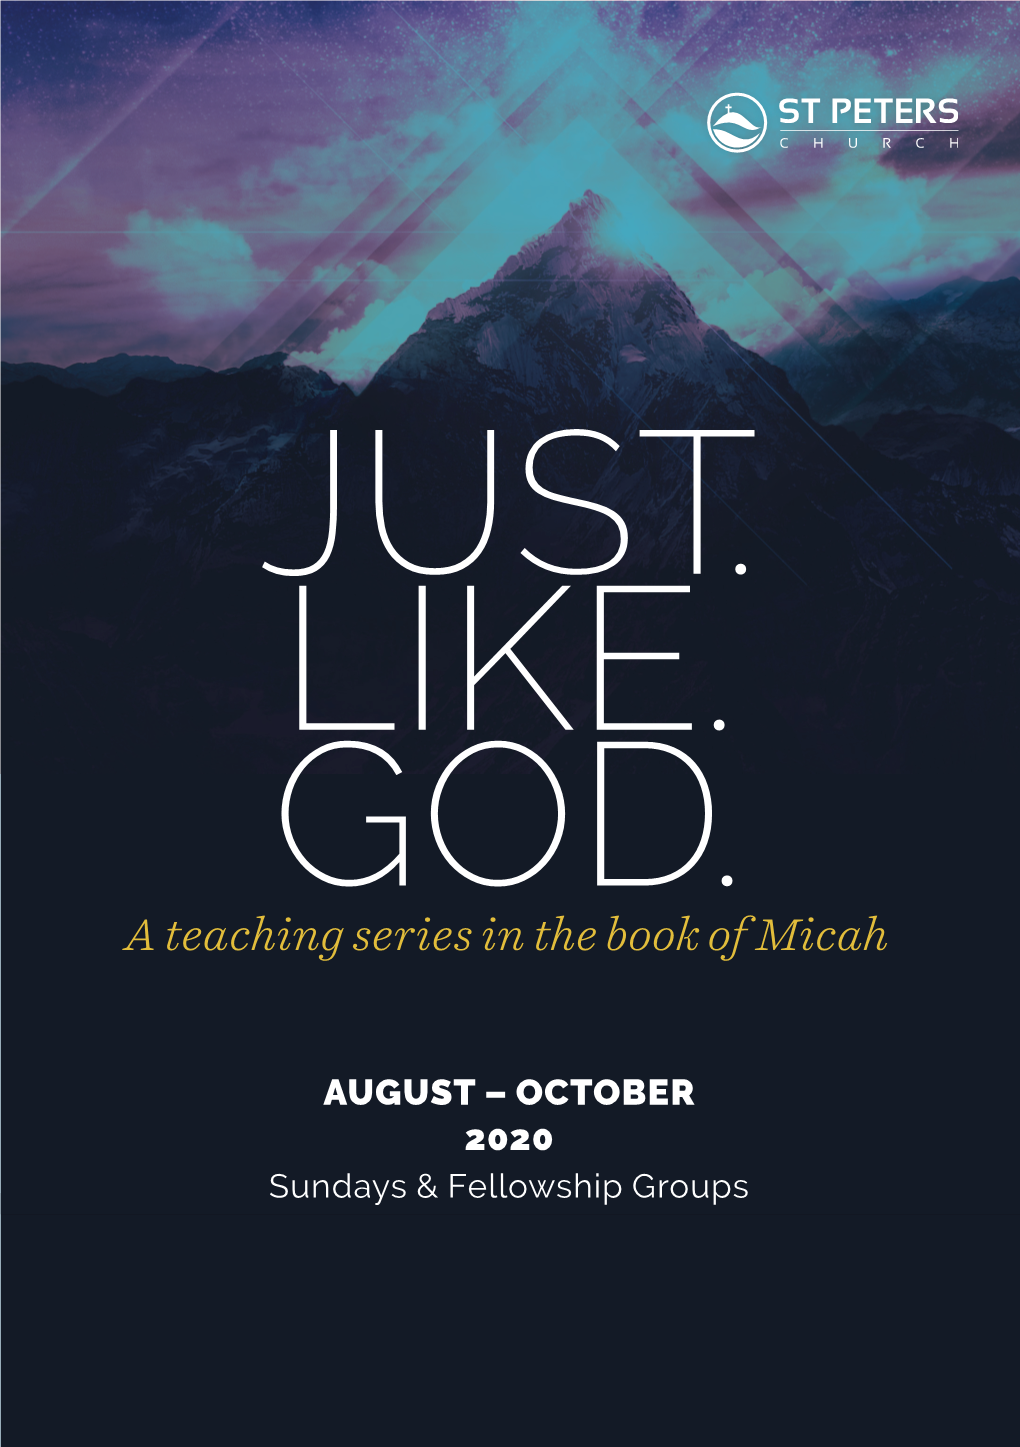 A Teaching Series in the Book of Micah